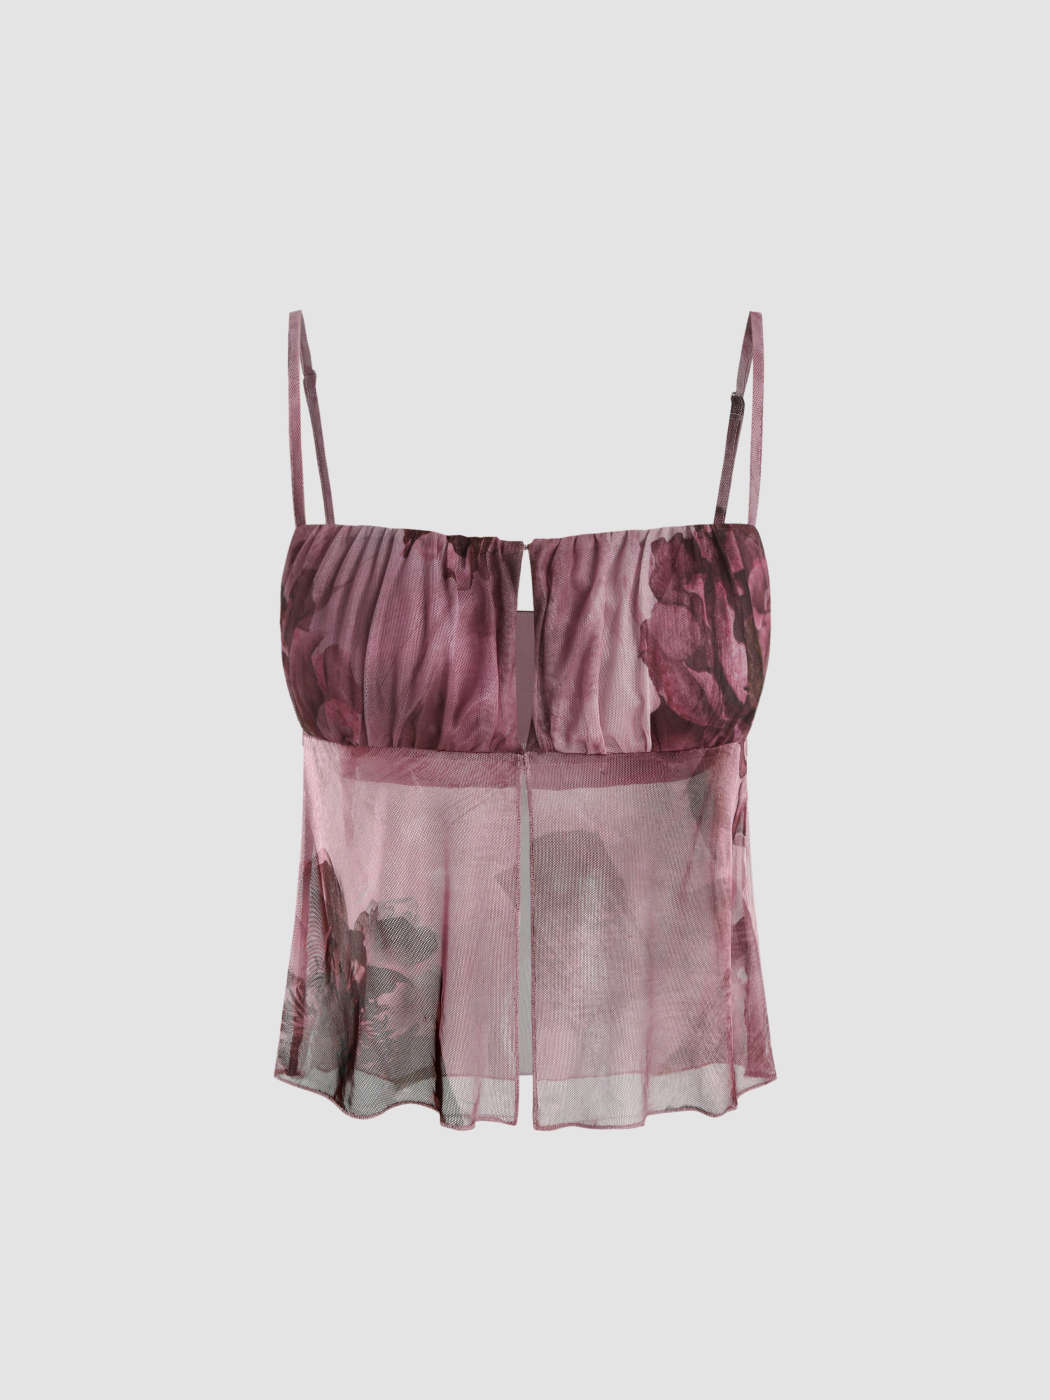 Lace Sheer Cami Top - Cider